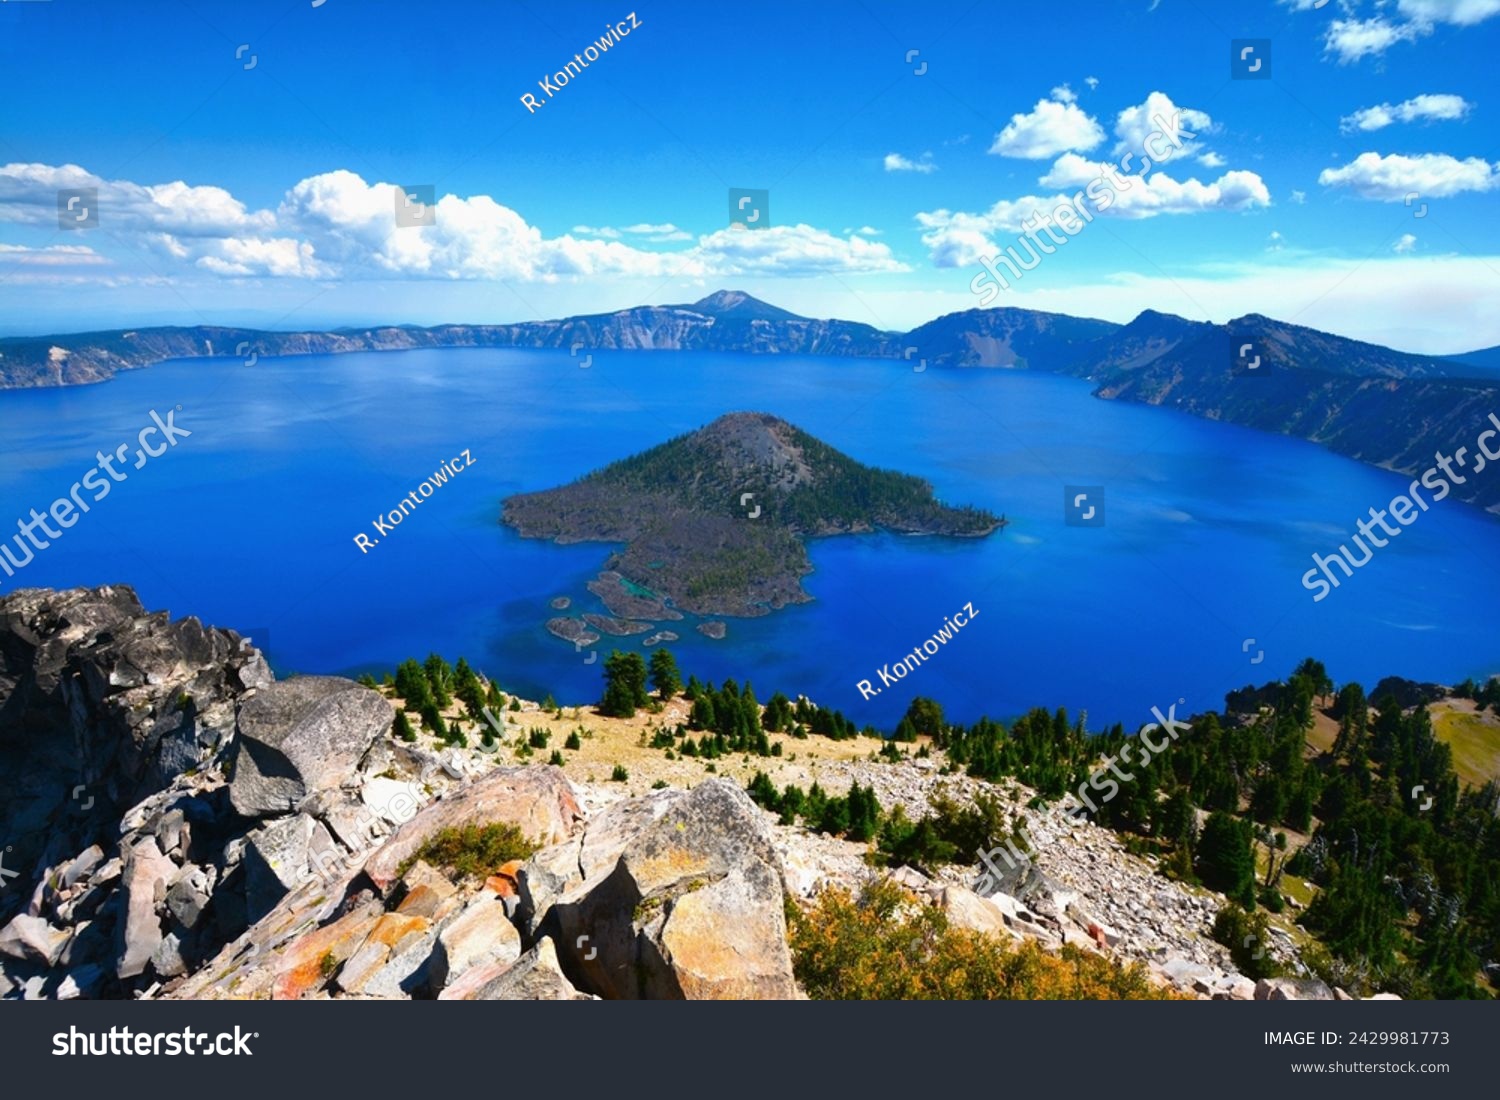 Panoramic view of Crater Lake - the main feature of Crater Lake National Park, the lake partly fills a caldera formed by the collapse of the volcano Mt. Mazama (south-central Oregon, western USA) #2429981773